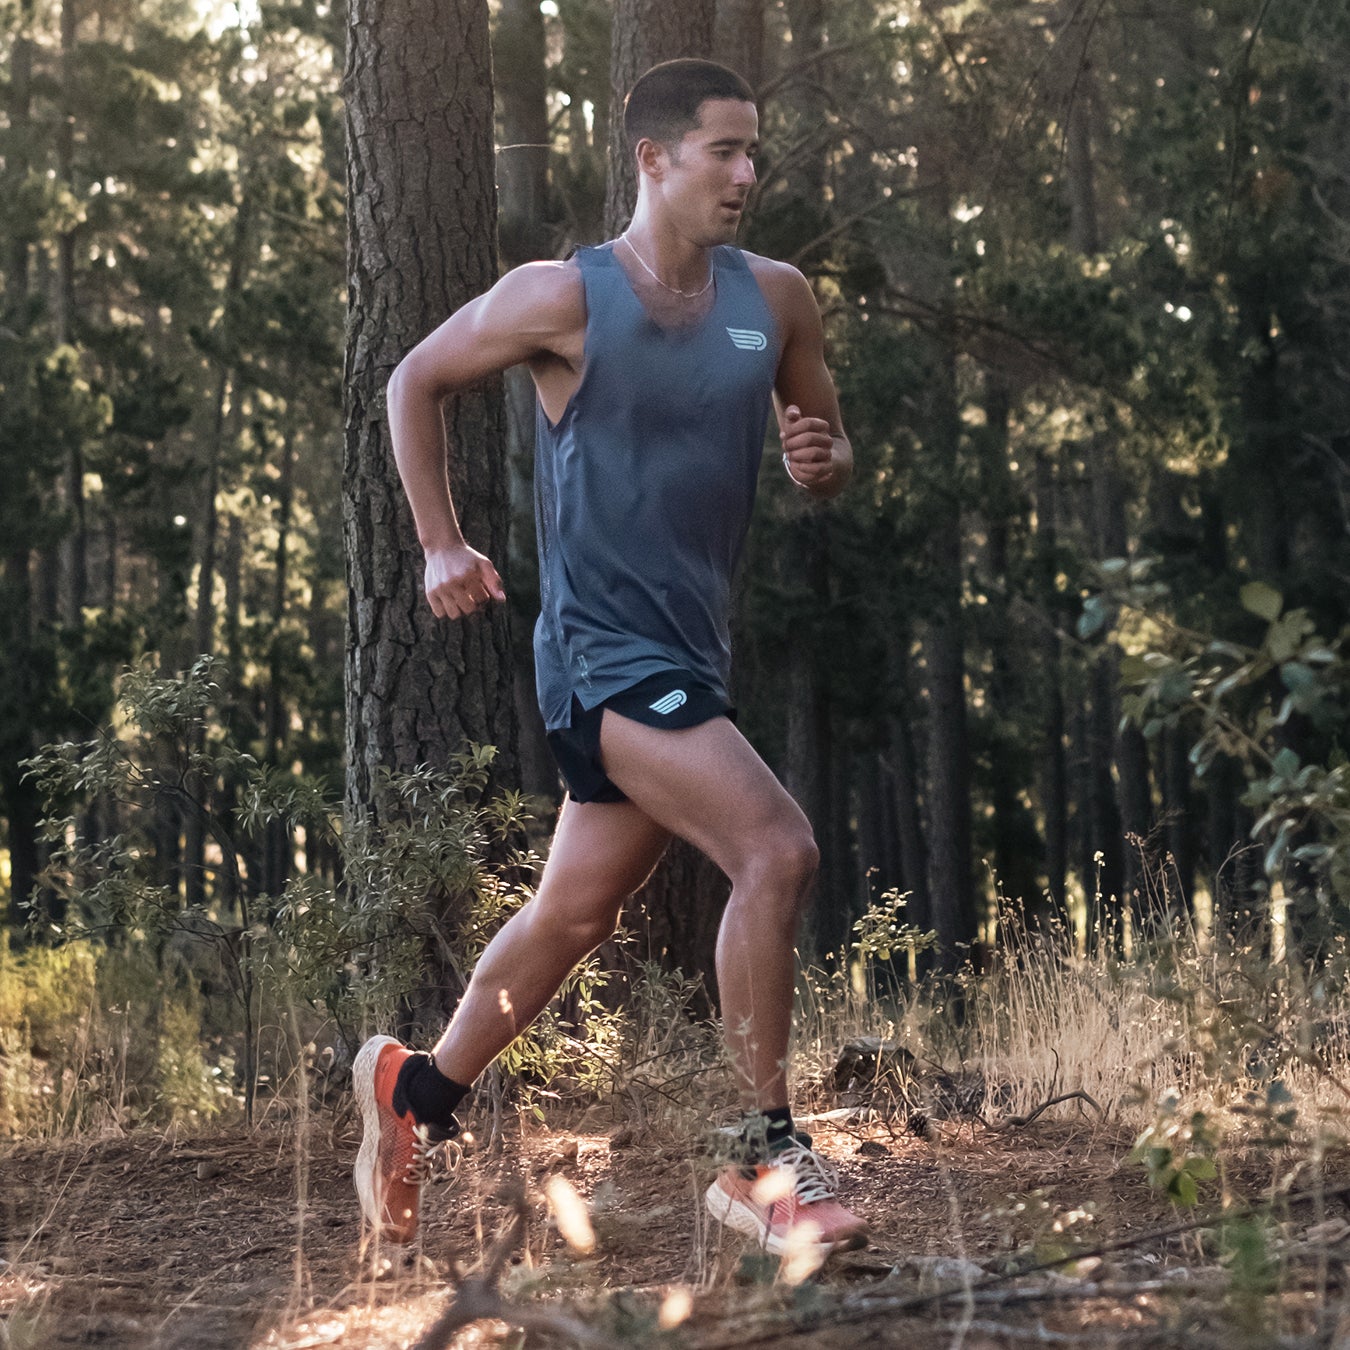 The Best Summer Running Gear Made of Recycled Materials